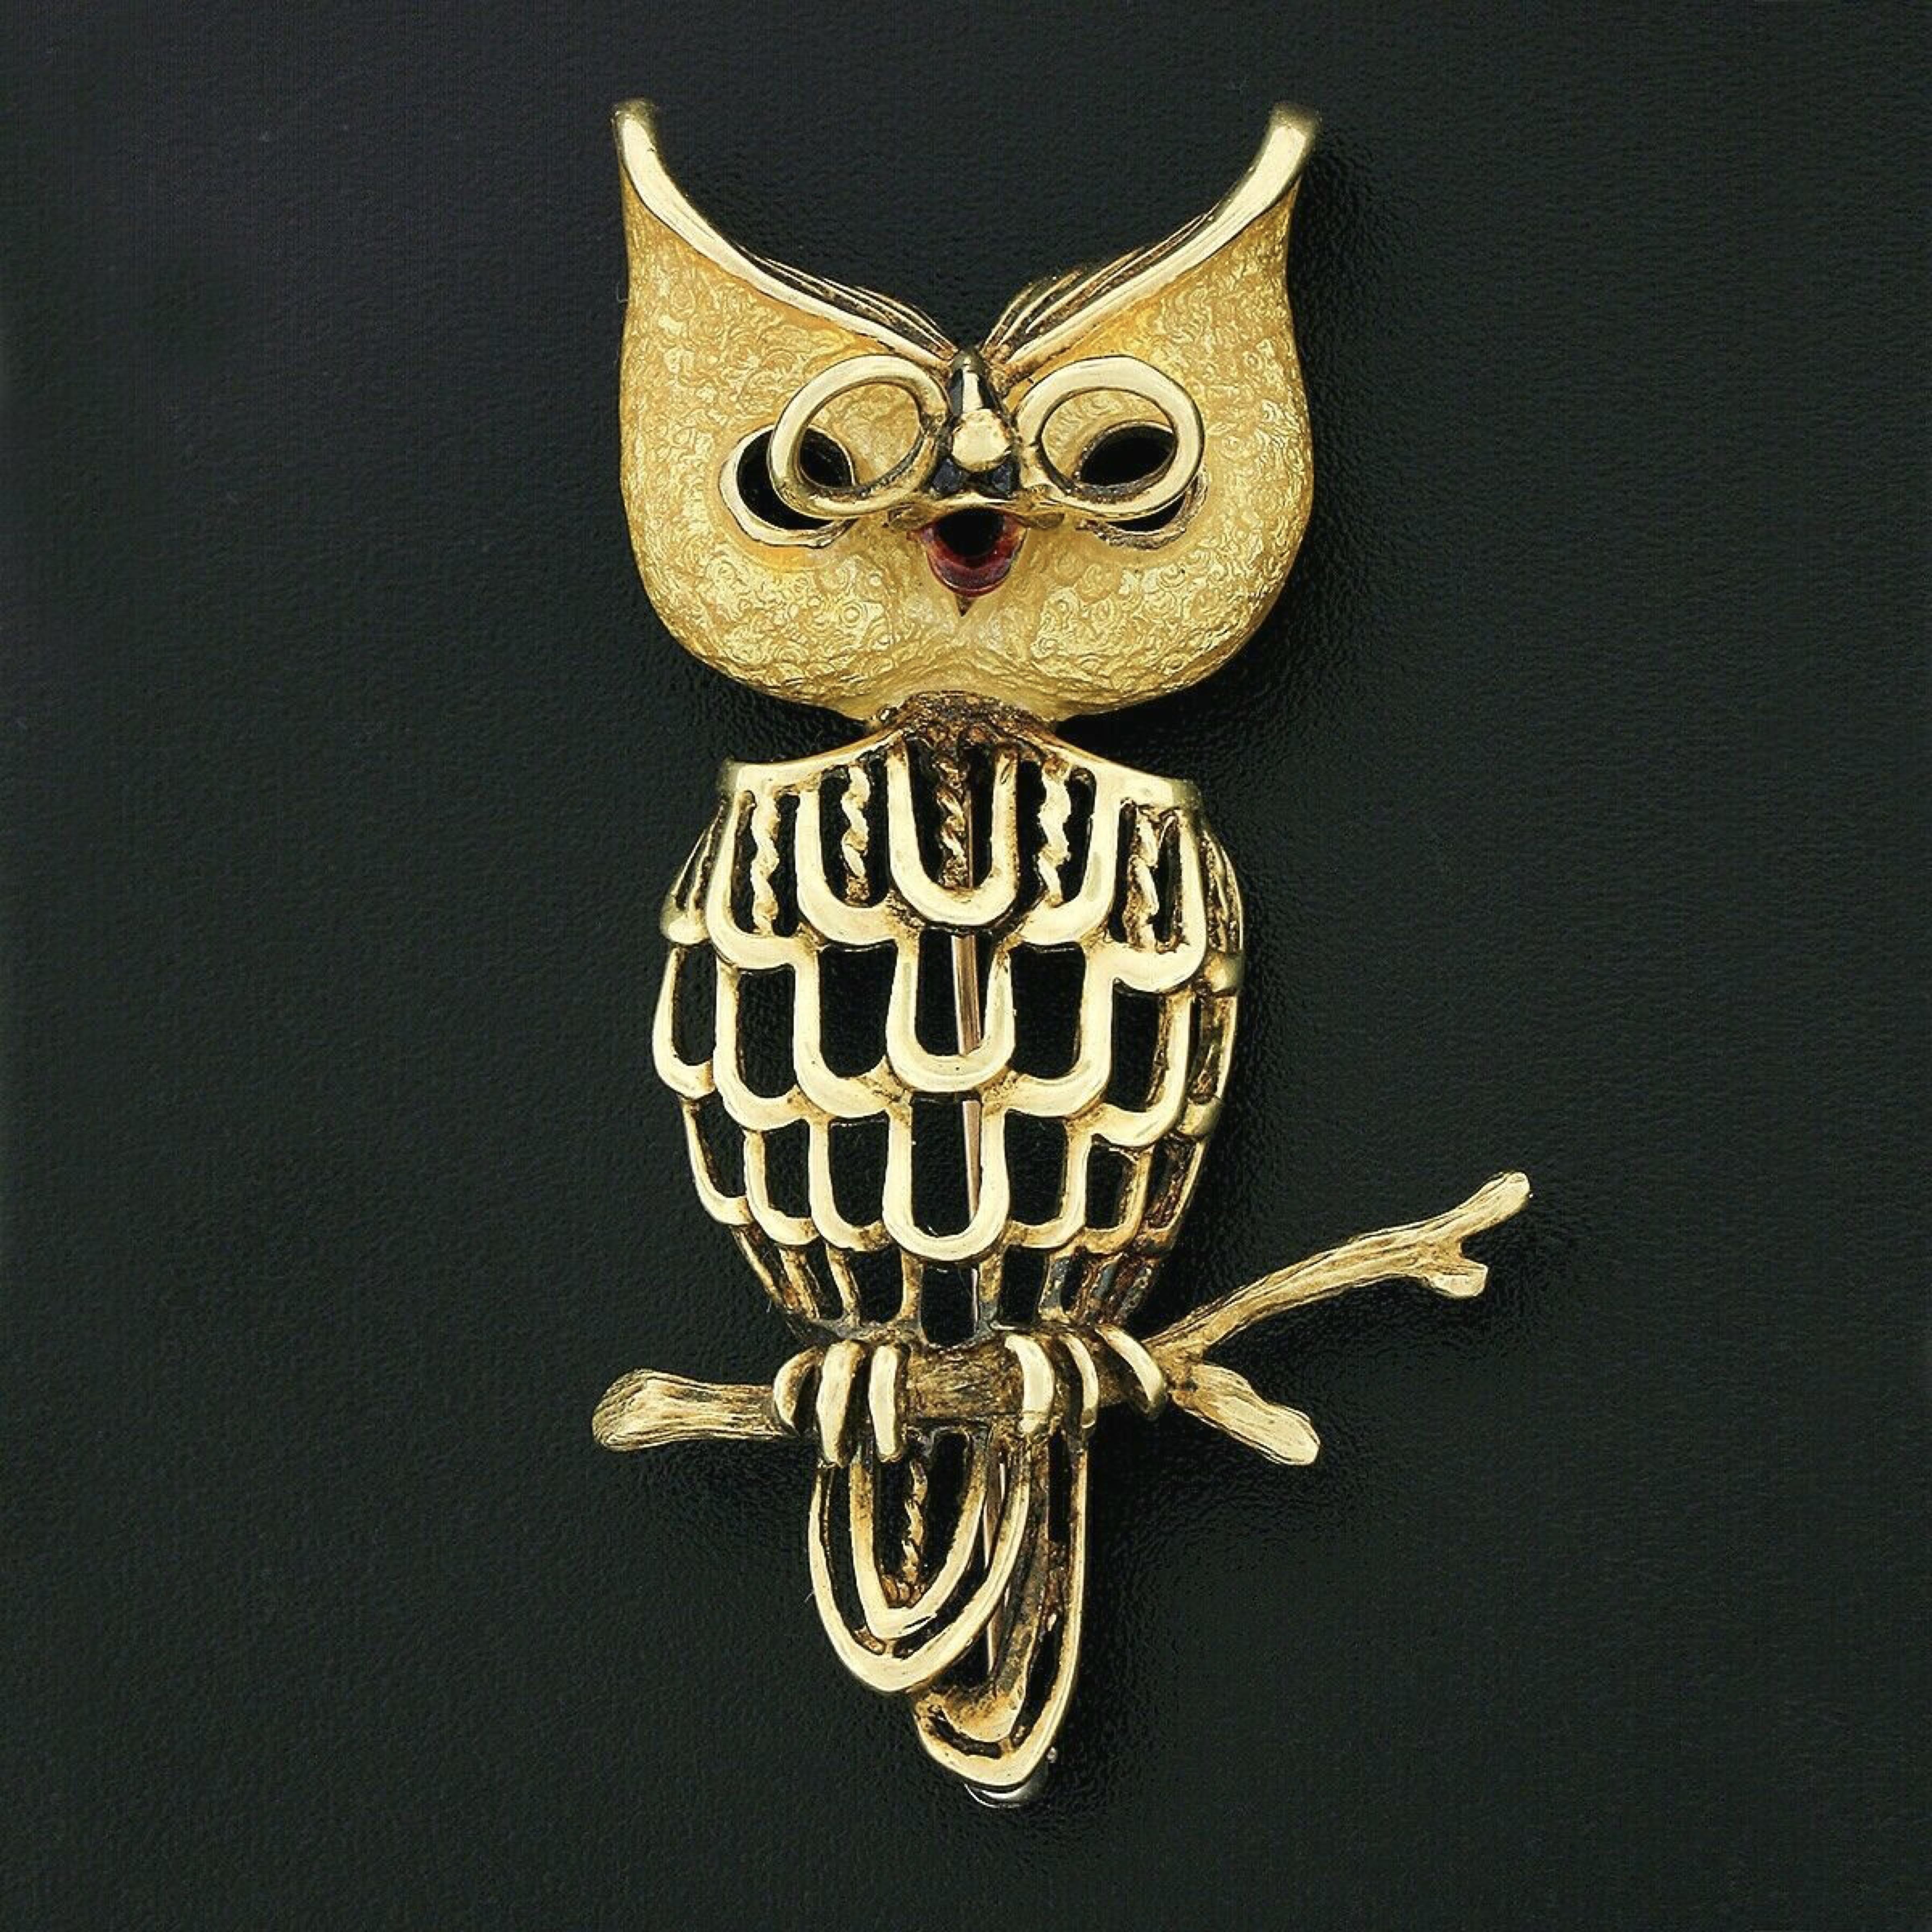 This beautiful vintage pin brooch was crafted from solid 18k yellow gold and features an incredibly detailed owl on a branch open work design adorned with lovely enamel throughout its head. The magnificent detail gives this piece its wonderful